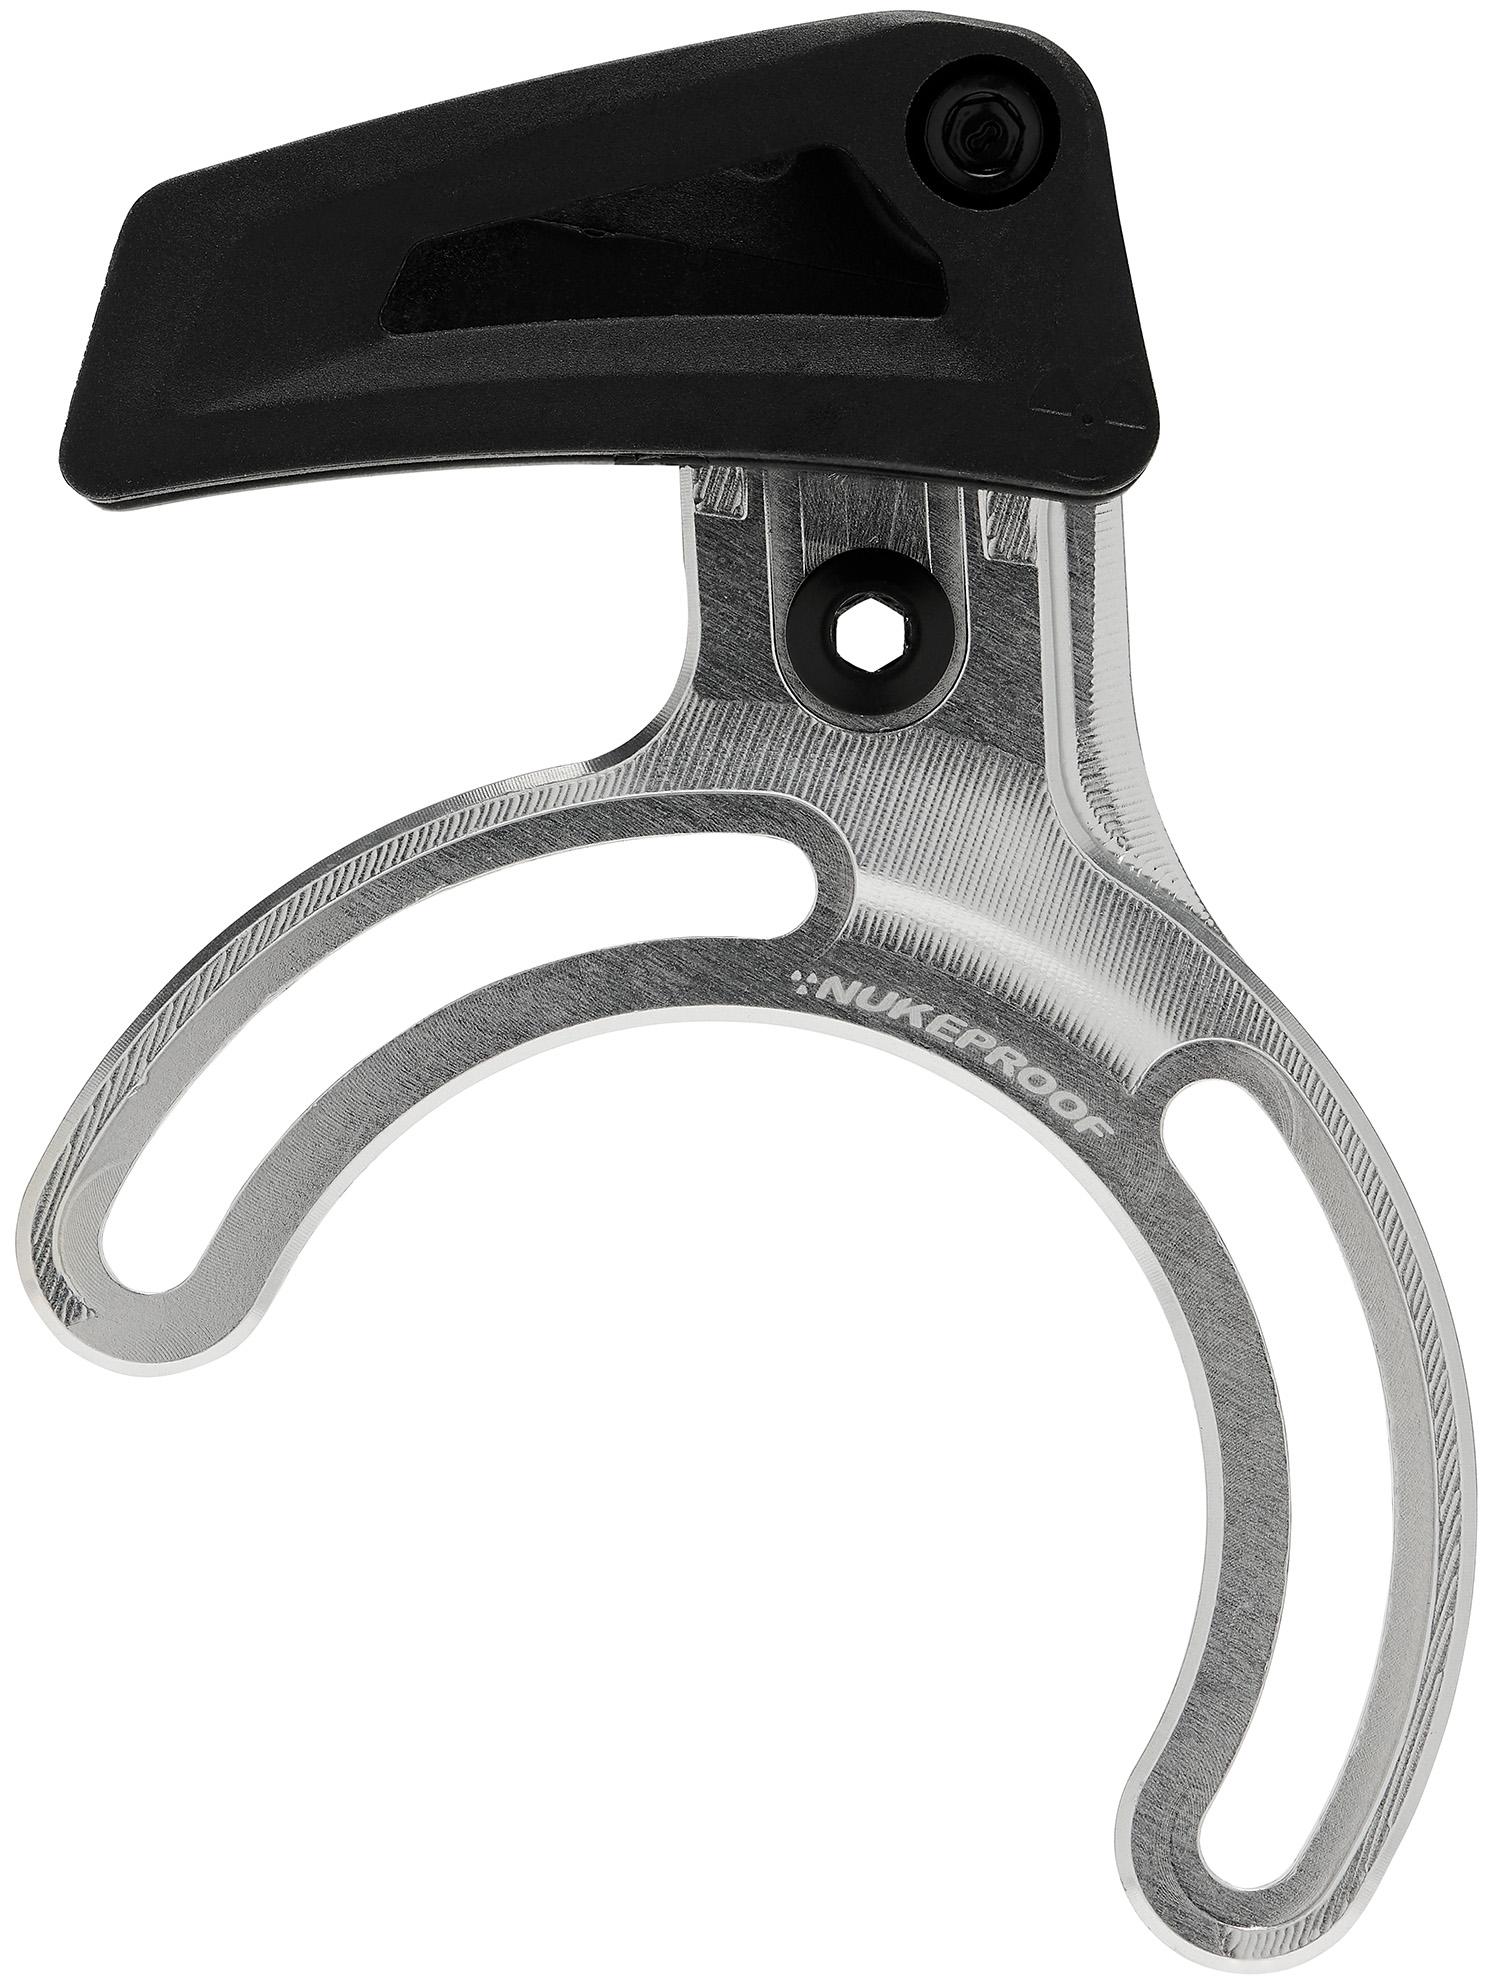 Nukeproof Shimano Steps Mount Chain Guide - Silver